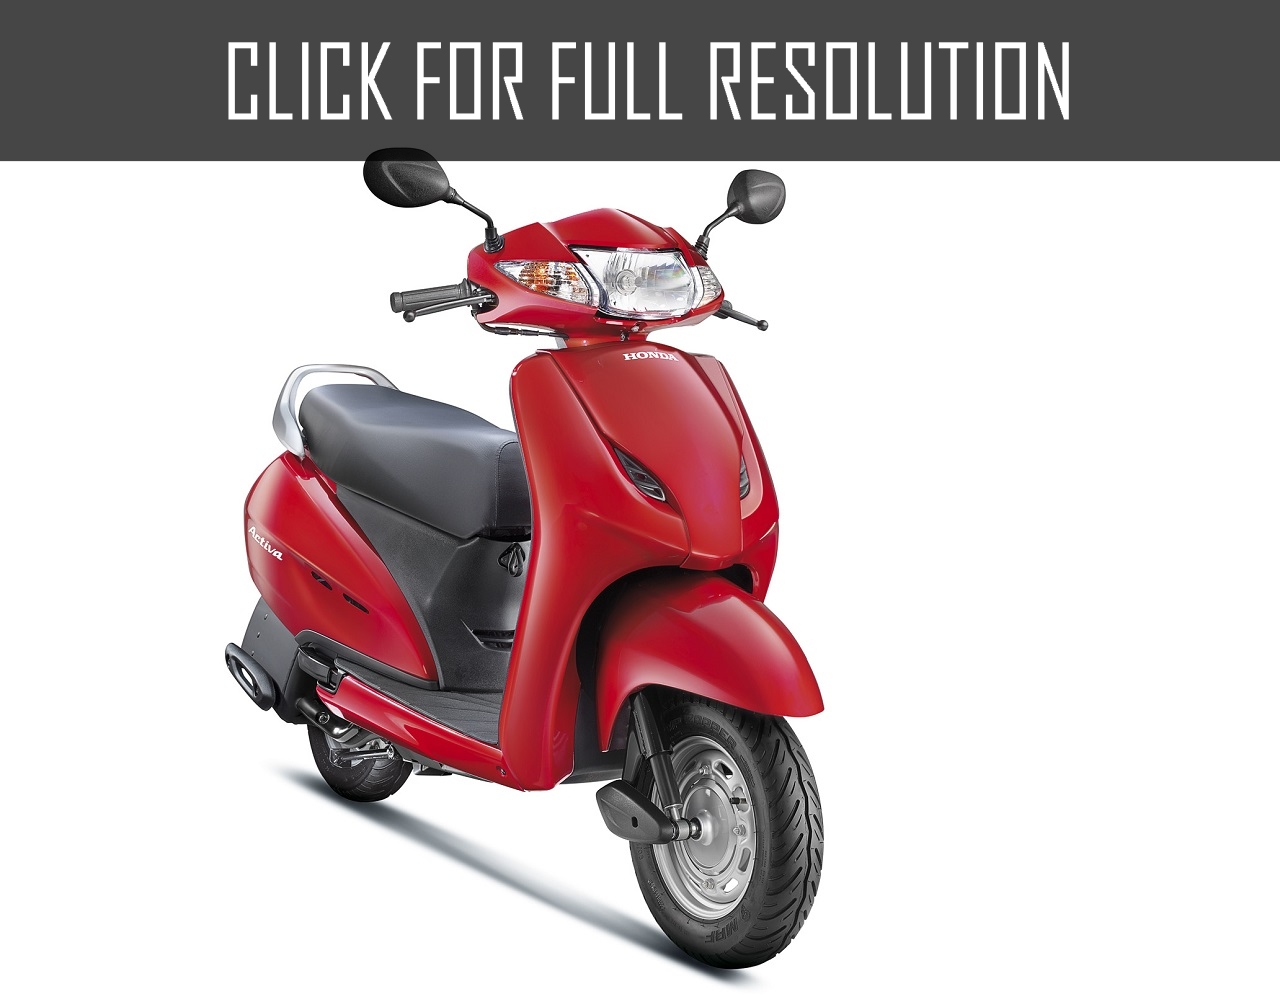 Honda Activa Best Image Gallery 6 12 Share And Download